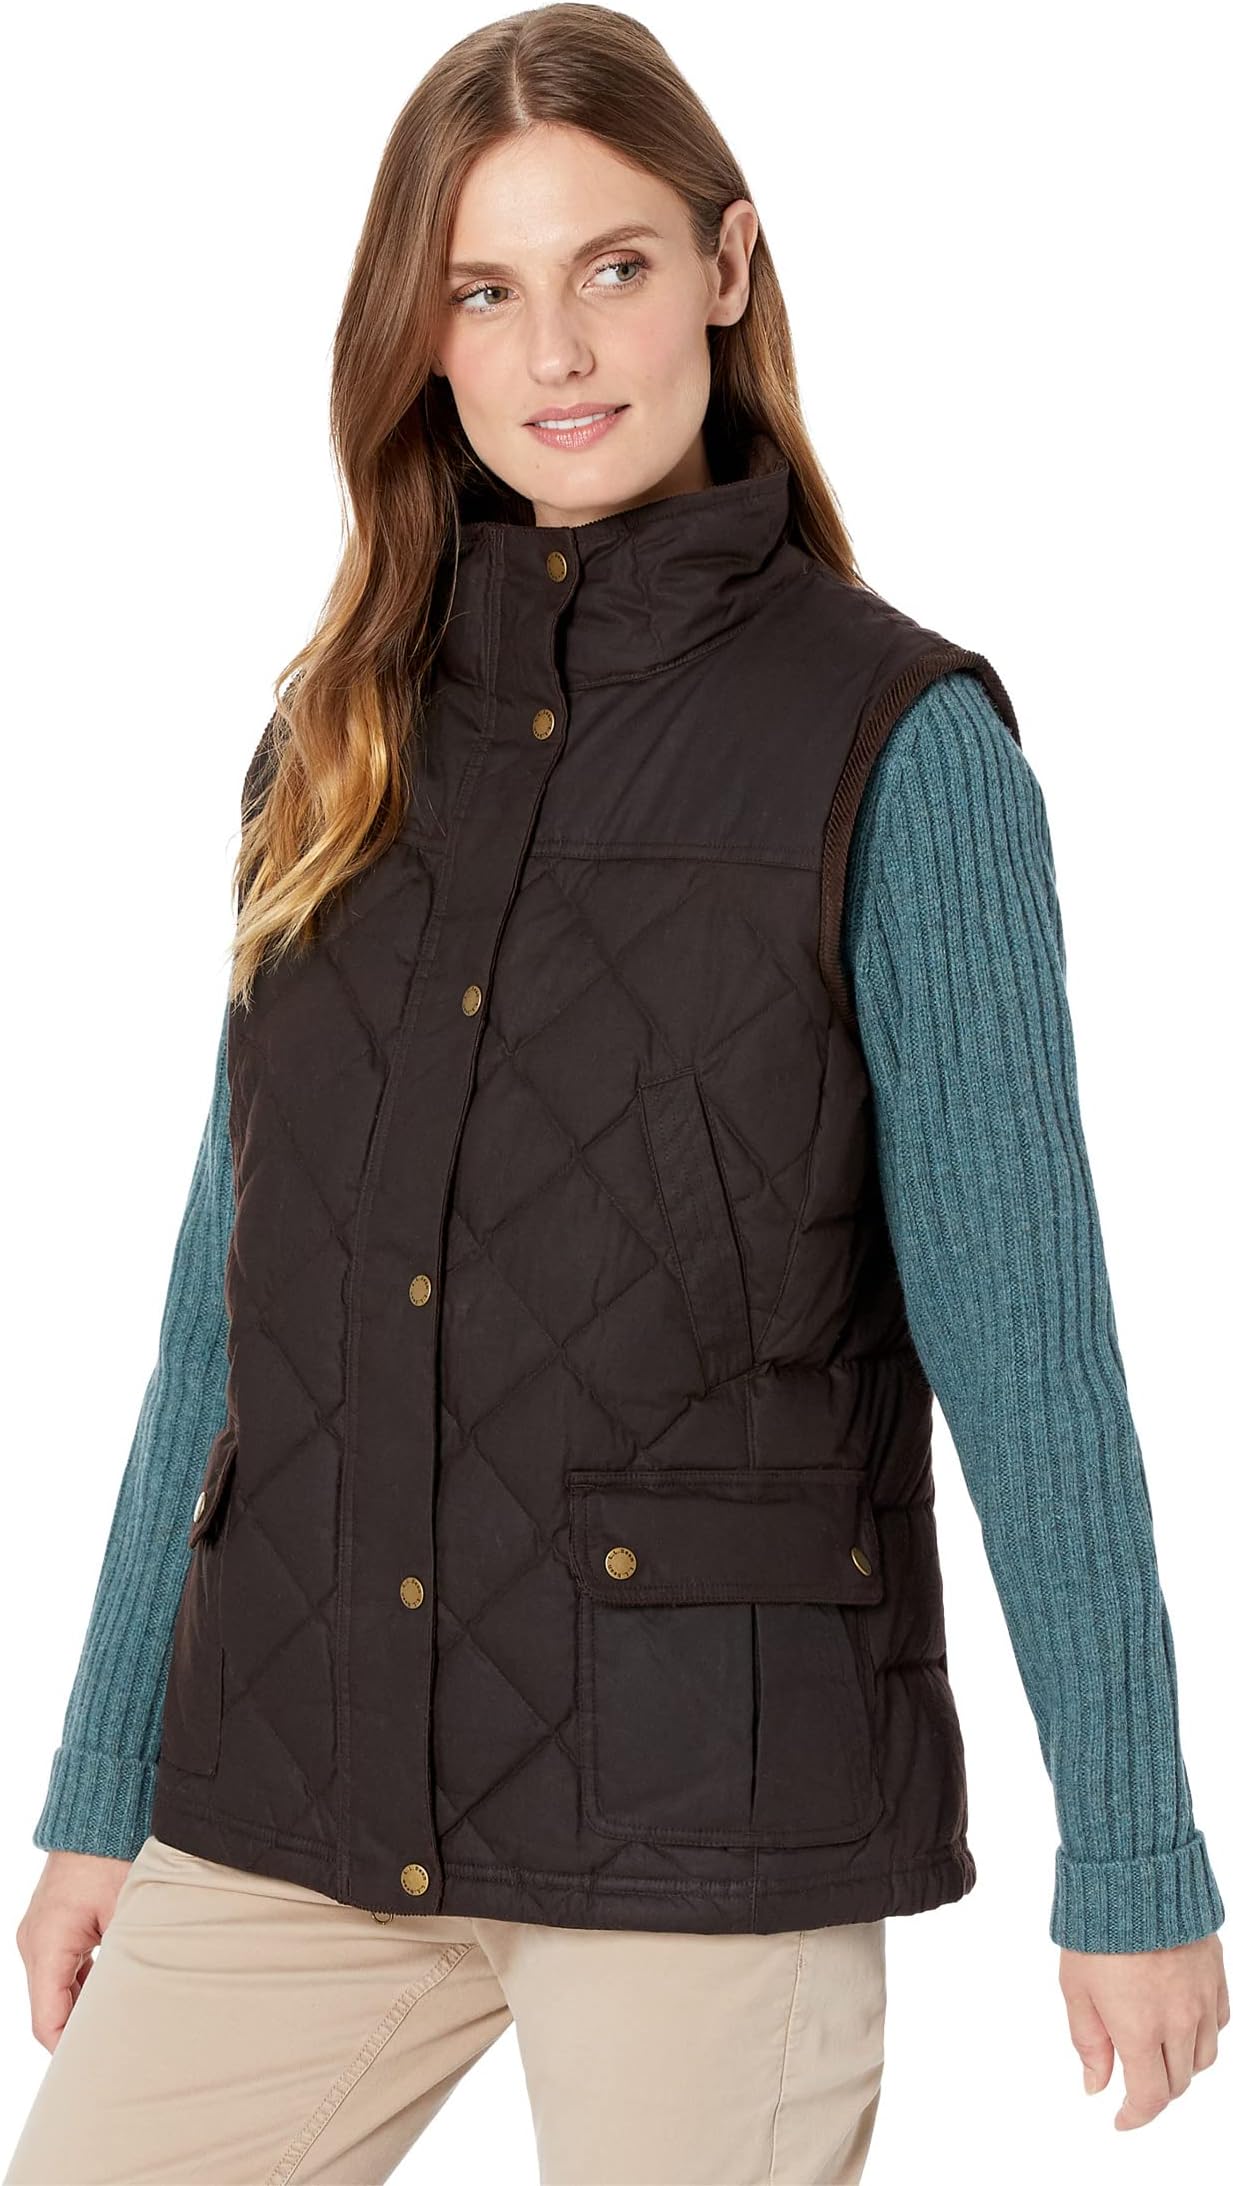 Жилет Upcountry Waxed Cotton Down Vest L.L.Bean, цвет Coffee Bean coffee grinder stainless electric herbs spices nuts grains coffee bean grinding